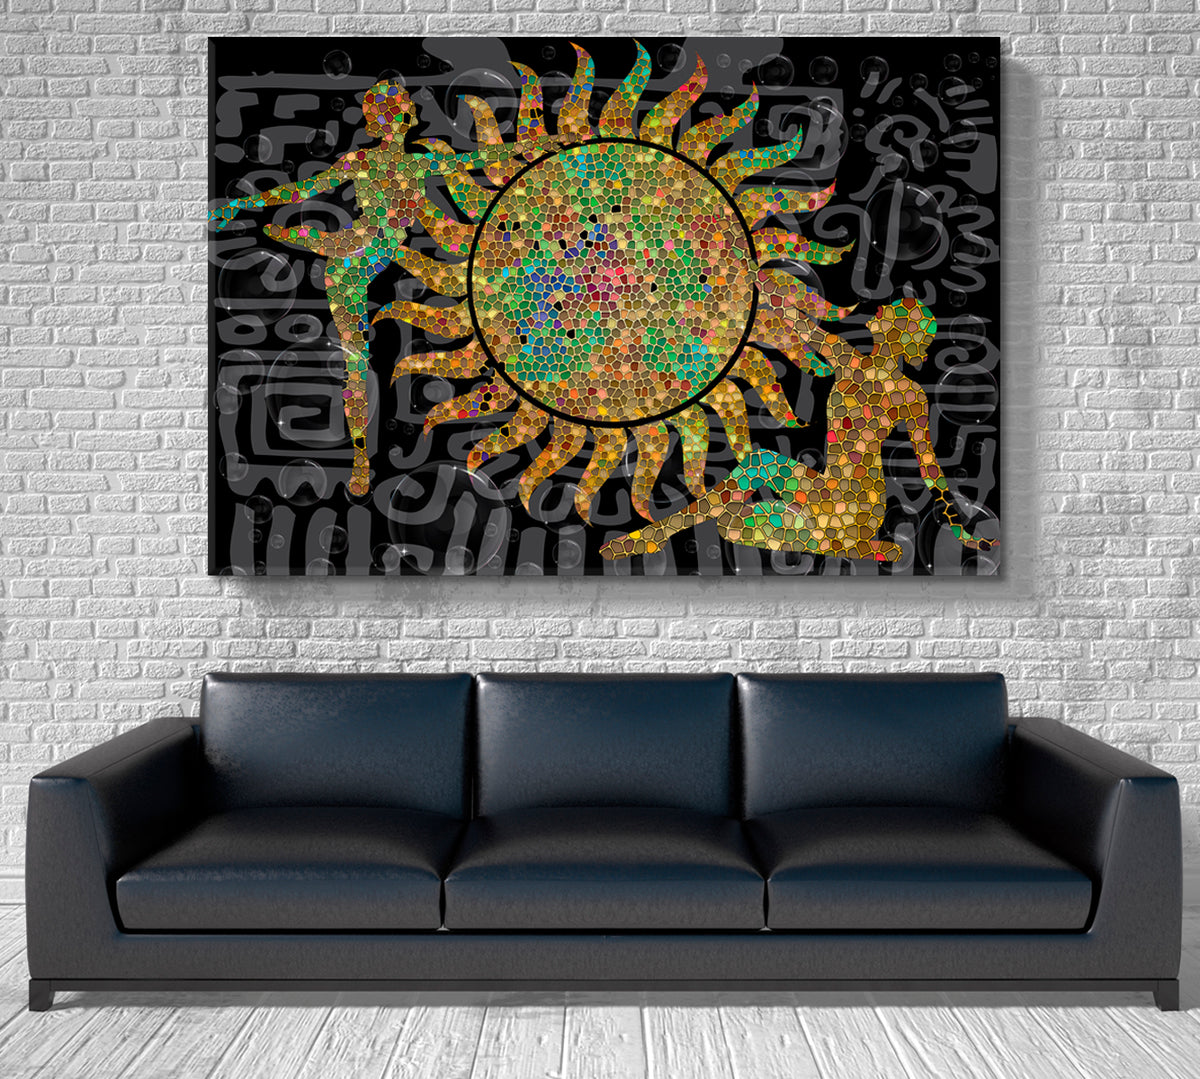 SOLAR ENERGY Constructive Abstract Figurative Boho Pattern Collage Contemporary Art Artesty 1 panel 24" x 16" 